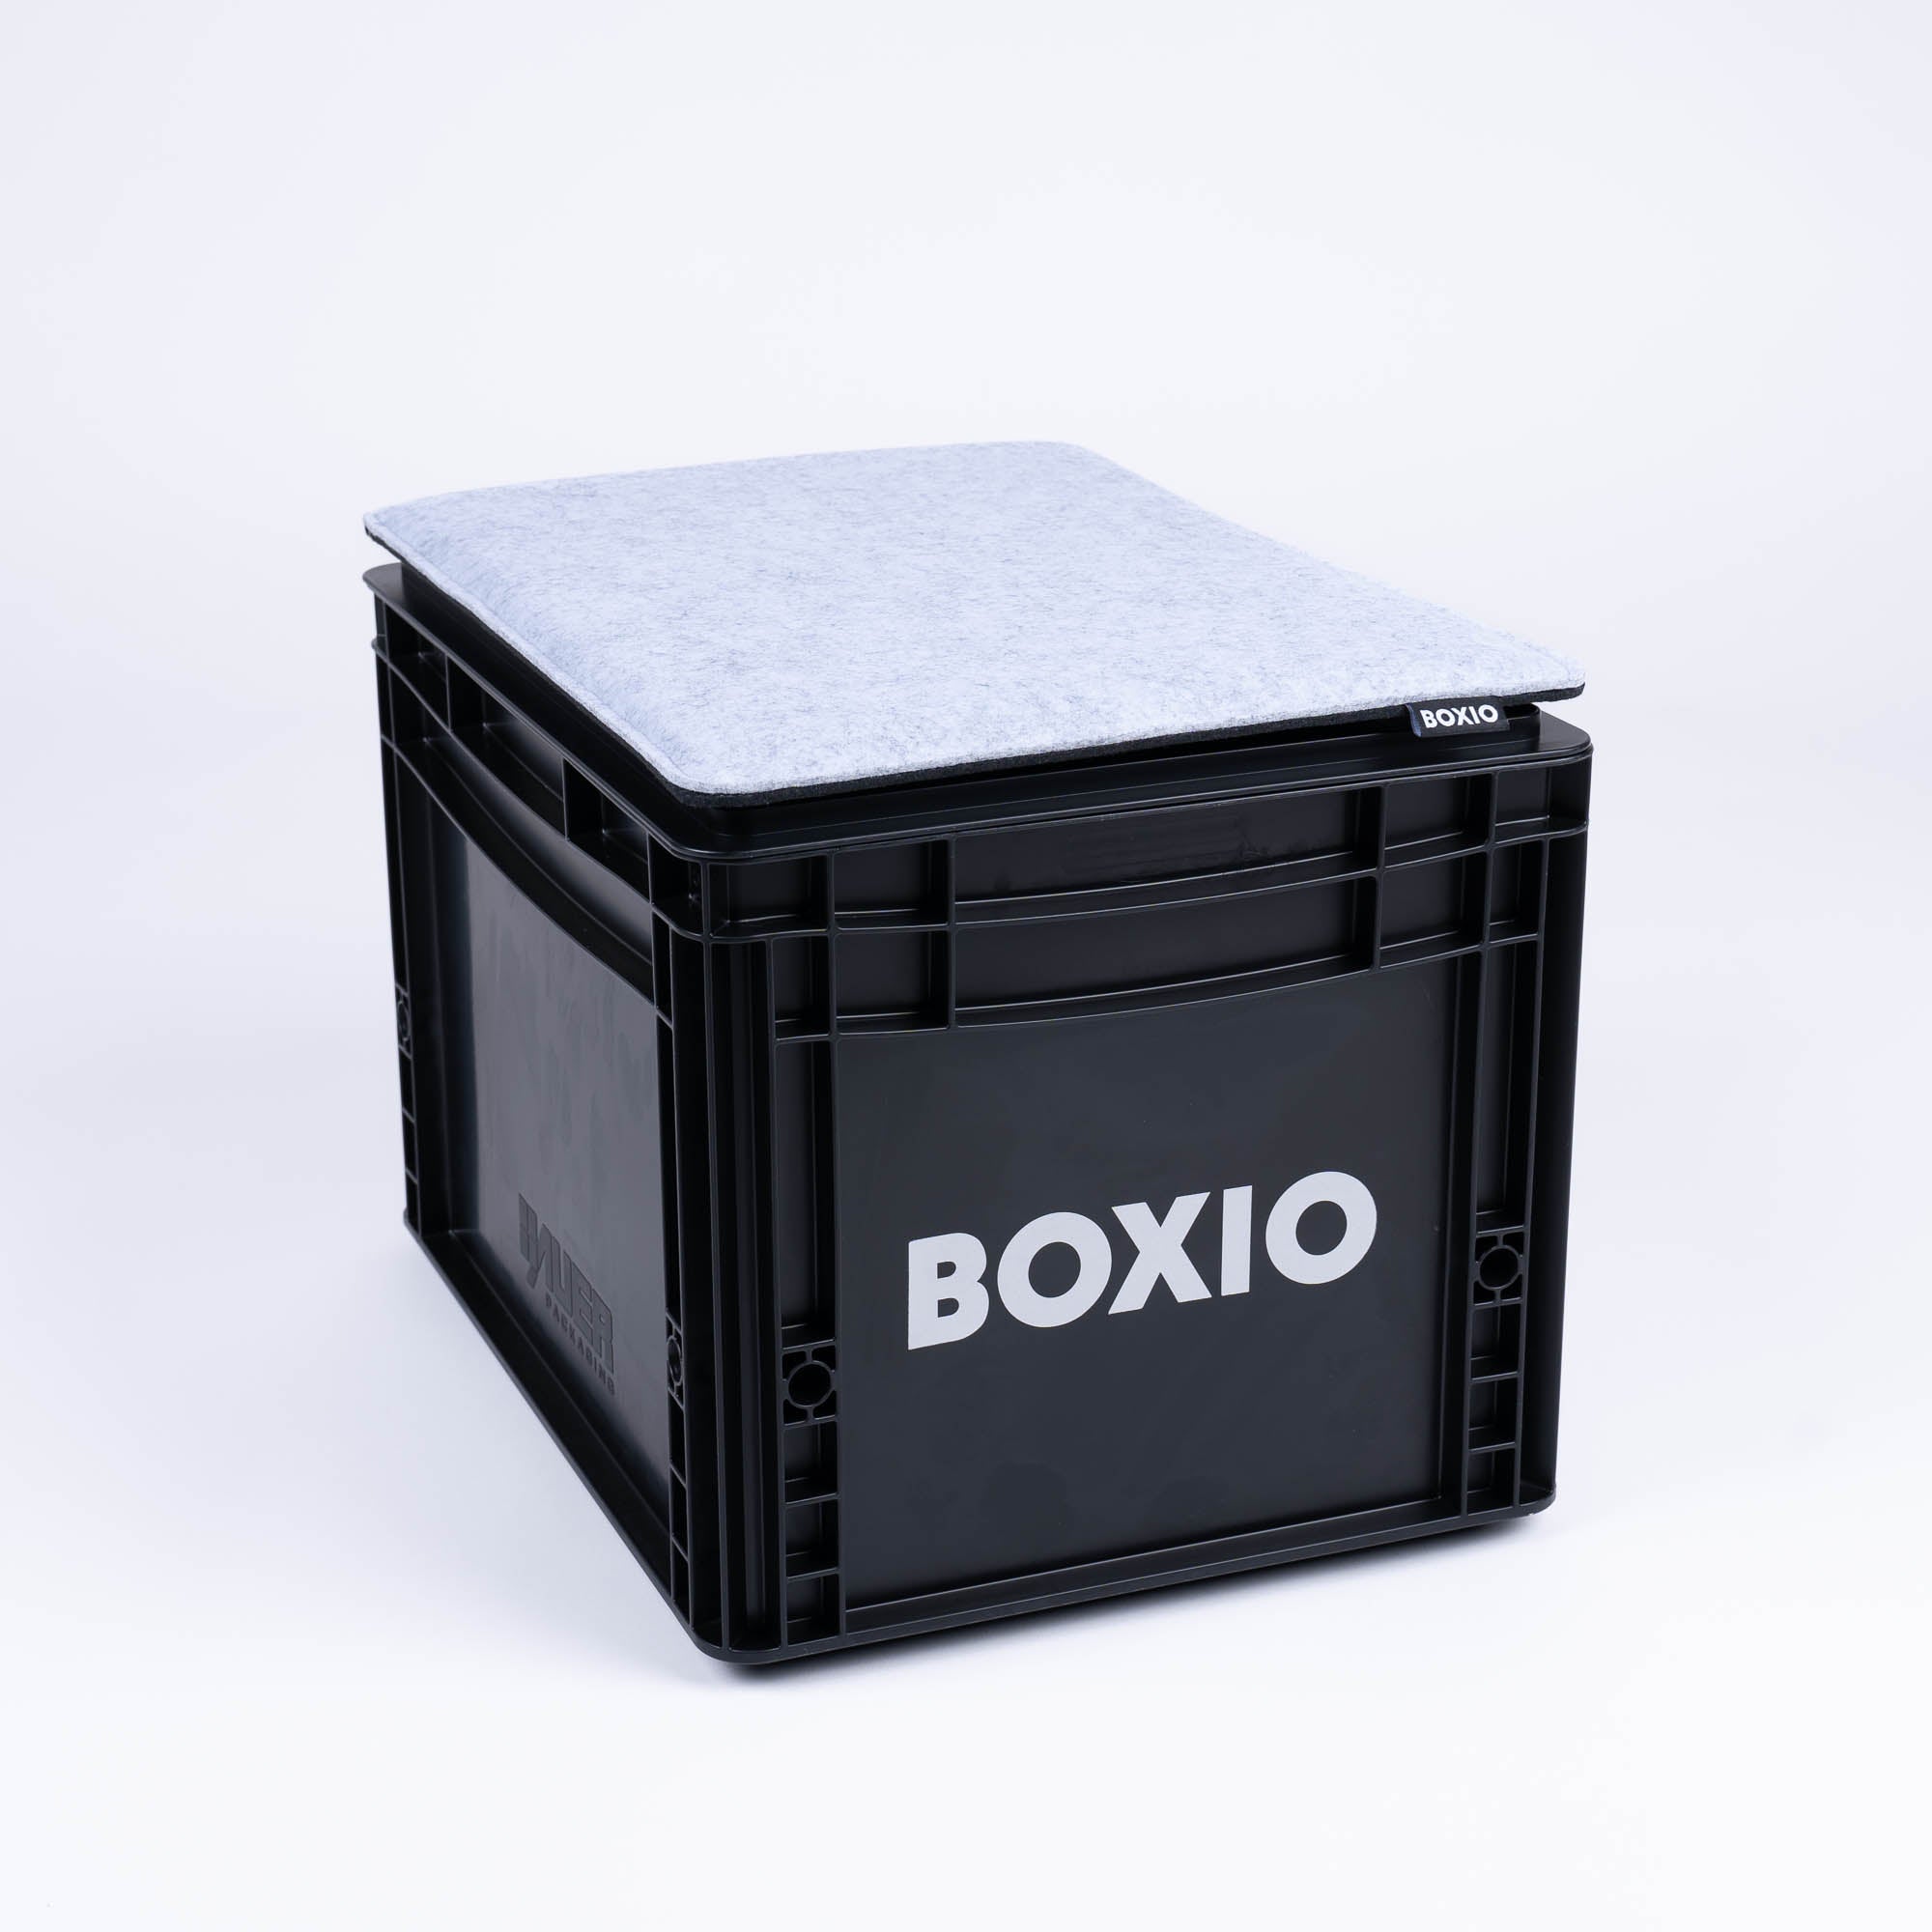 BOXIO - Tent : Pop Up Portable Camping Shower and Camping Toilet Tent -  Outdoor Camping Gear and Camp Shower Solution